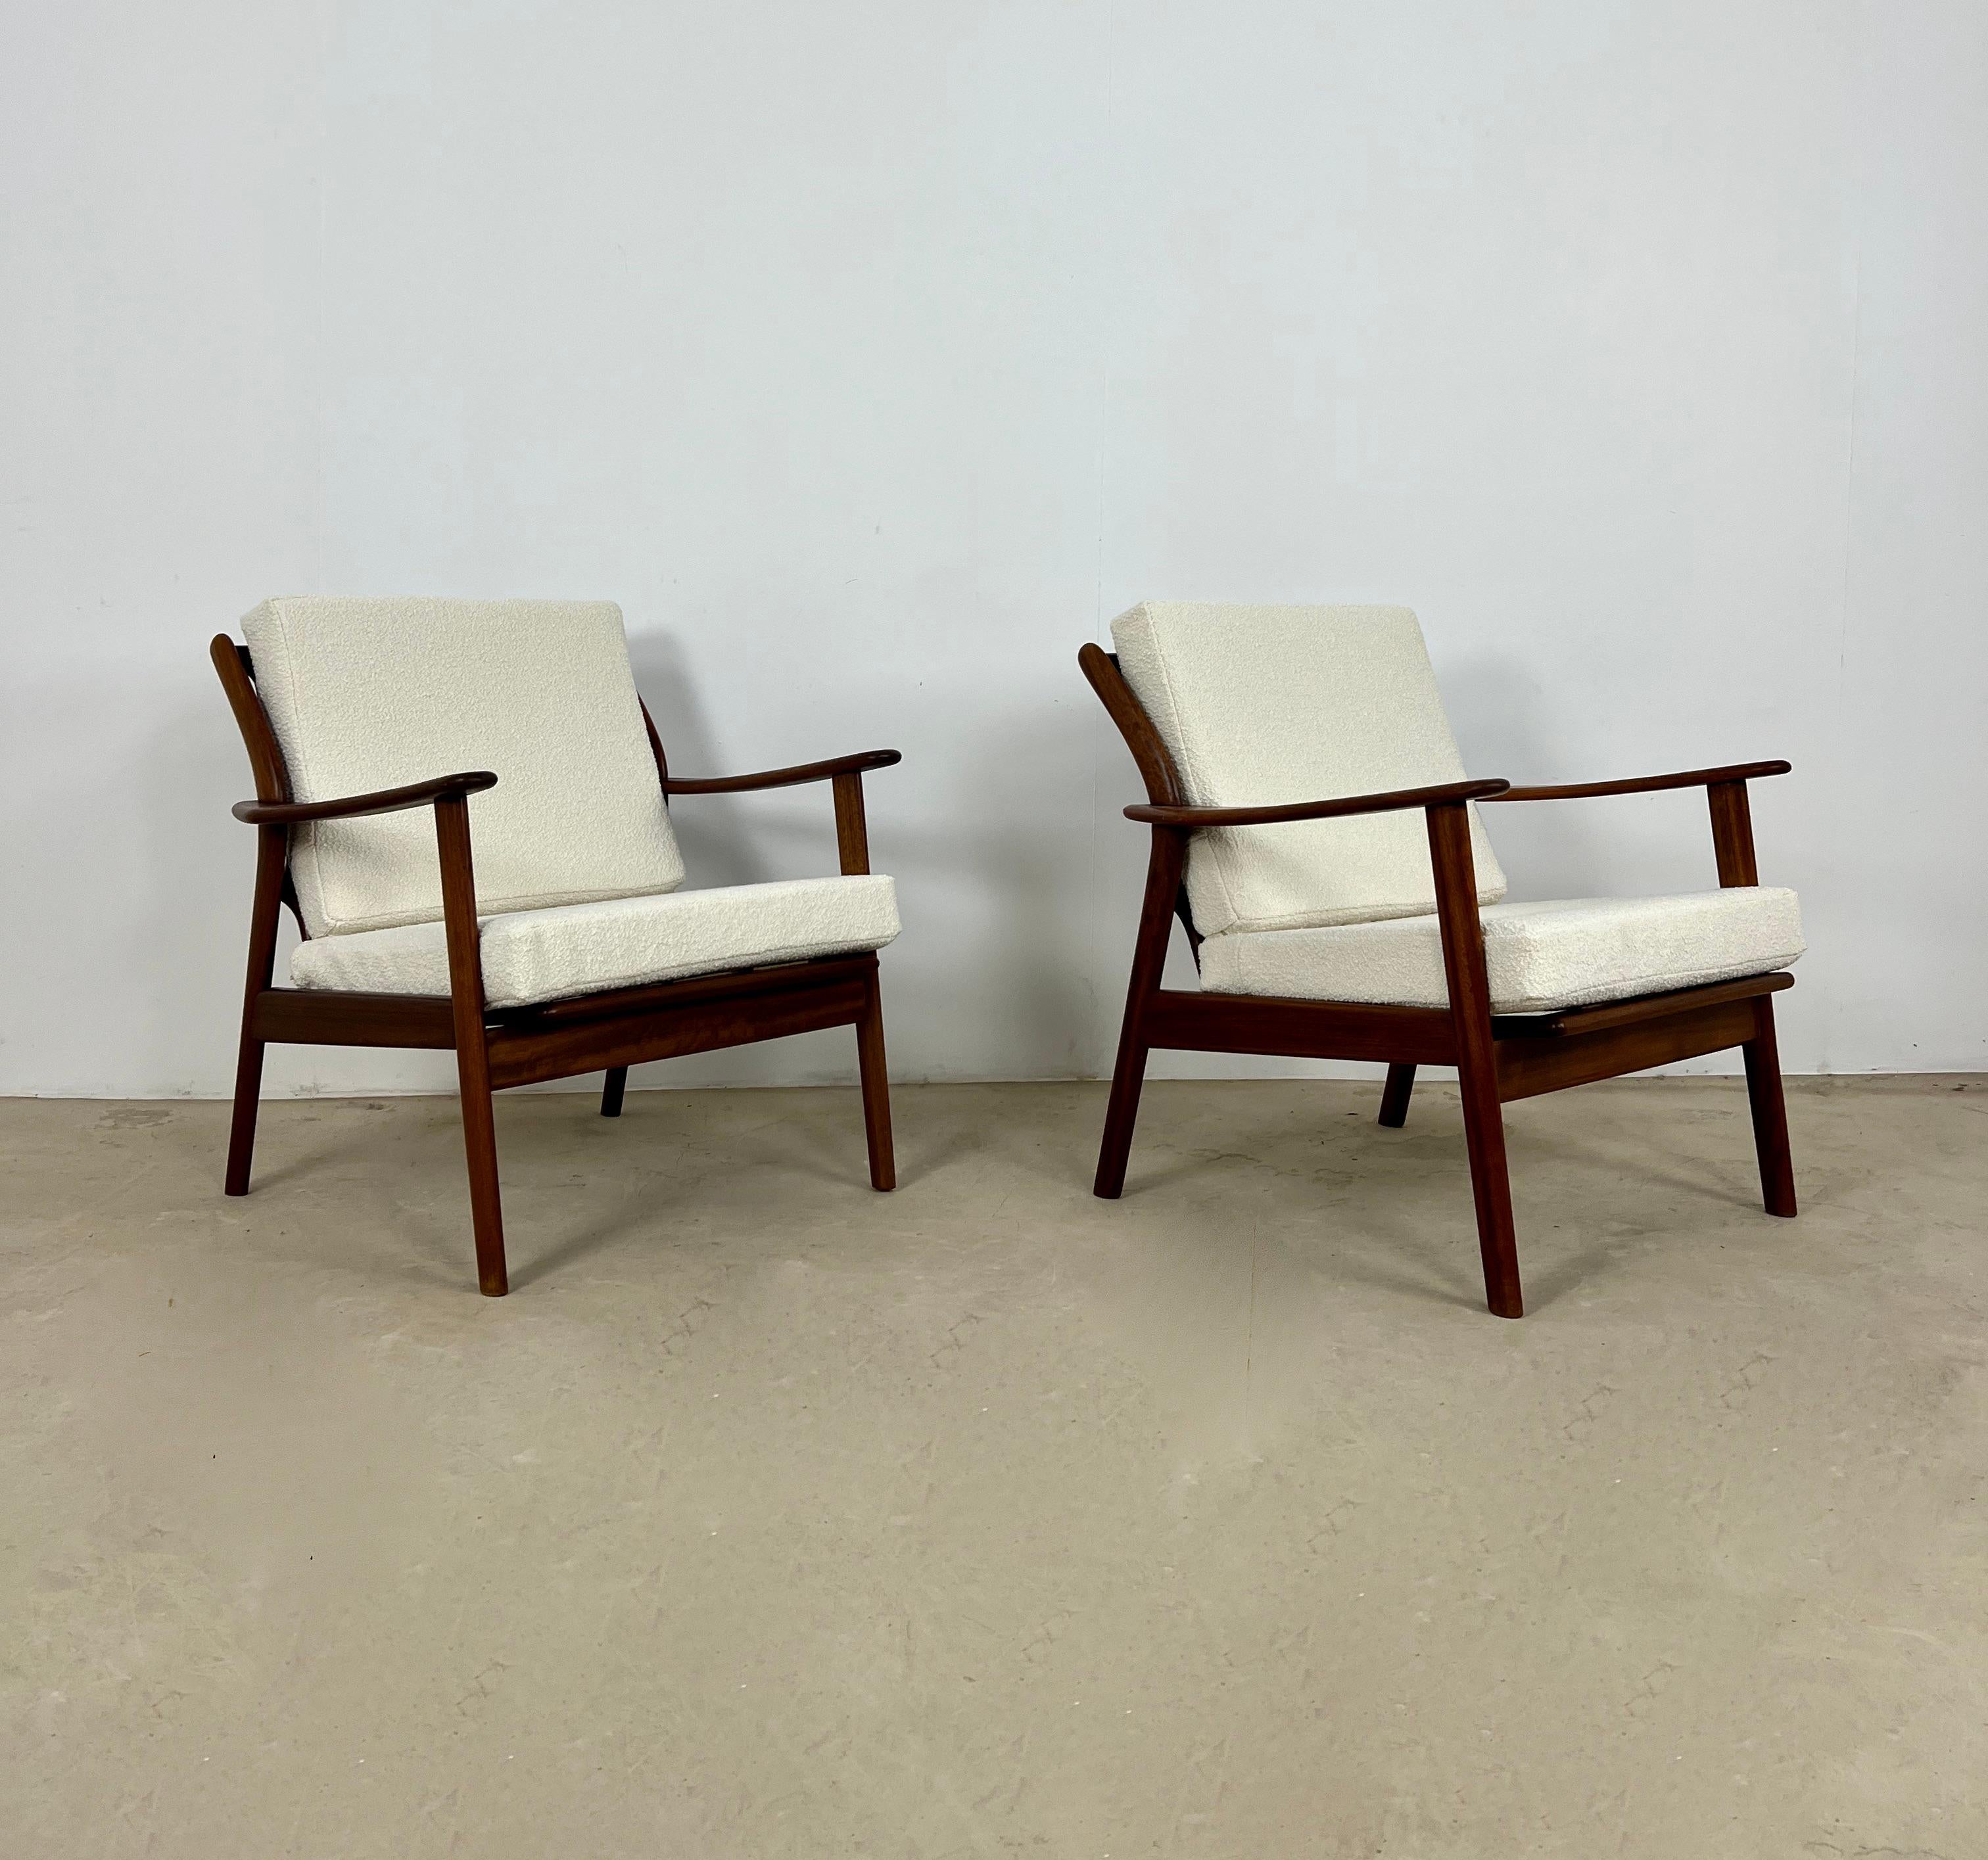 Pair of armchairs in wood and fabric of white color. Seat height: 42cm. Wear due to time and age of the chair. New straps under the seat.